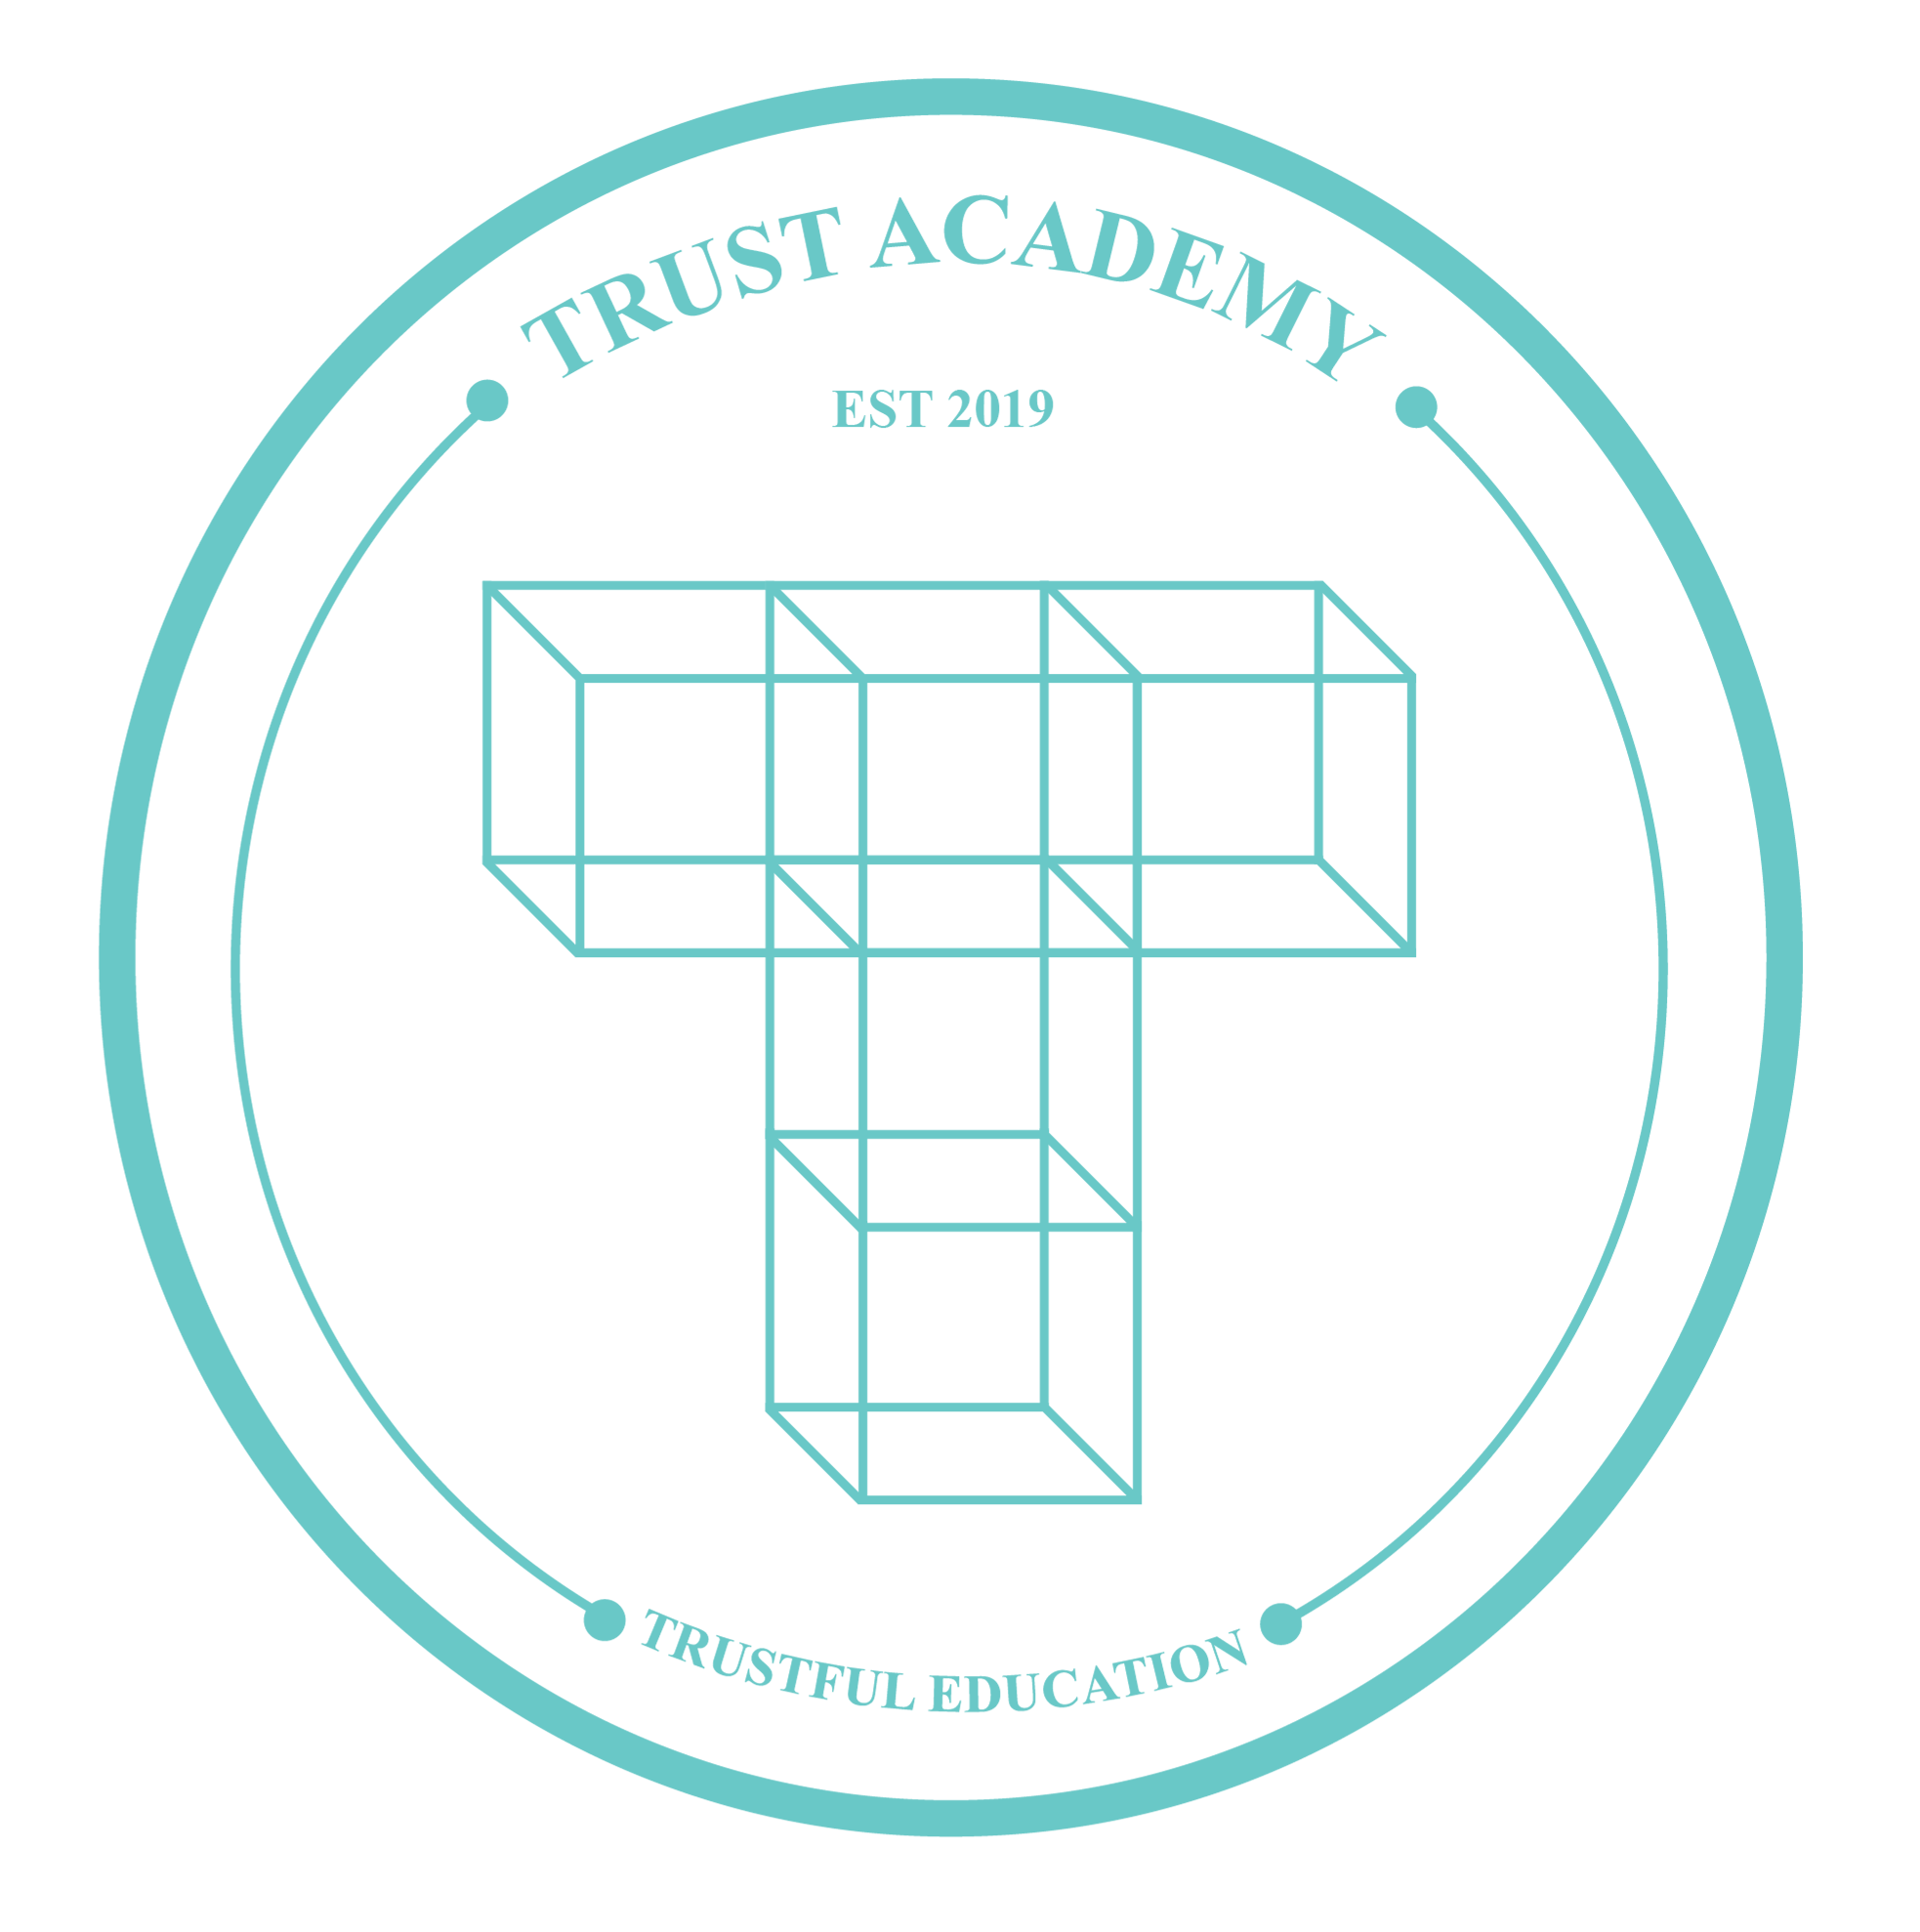 Appendix1, Trust Academy, Admission Procedure Step-by-Step 2023